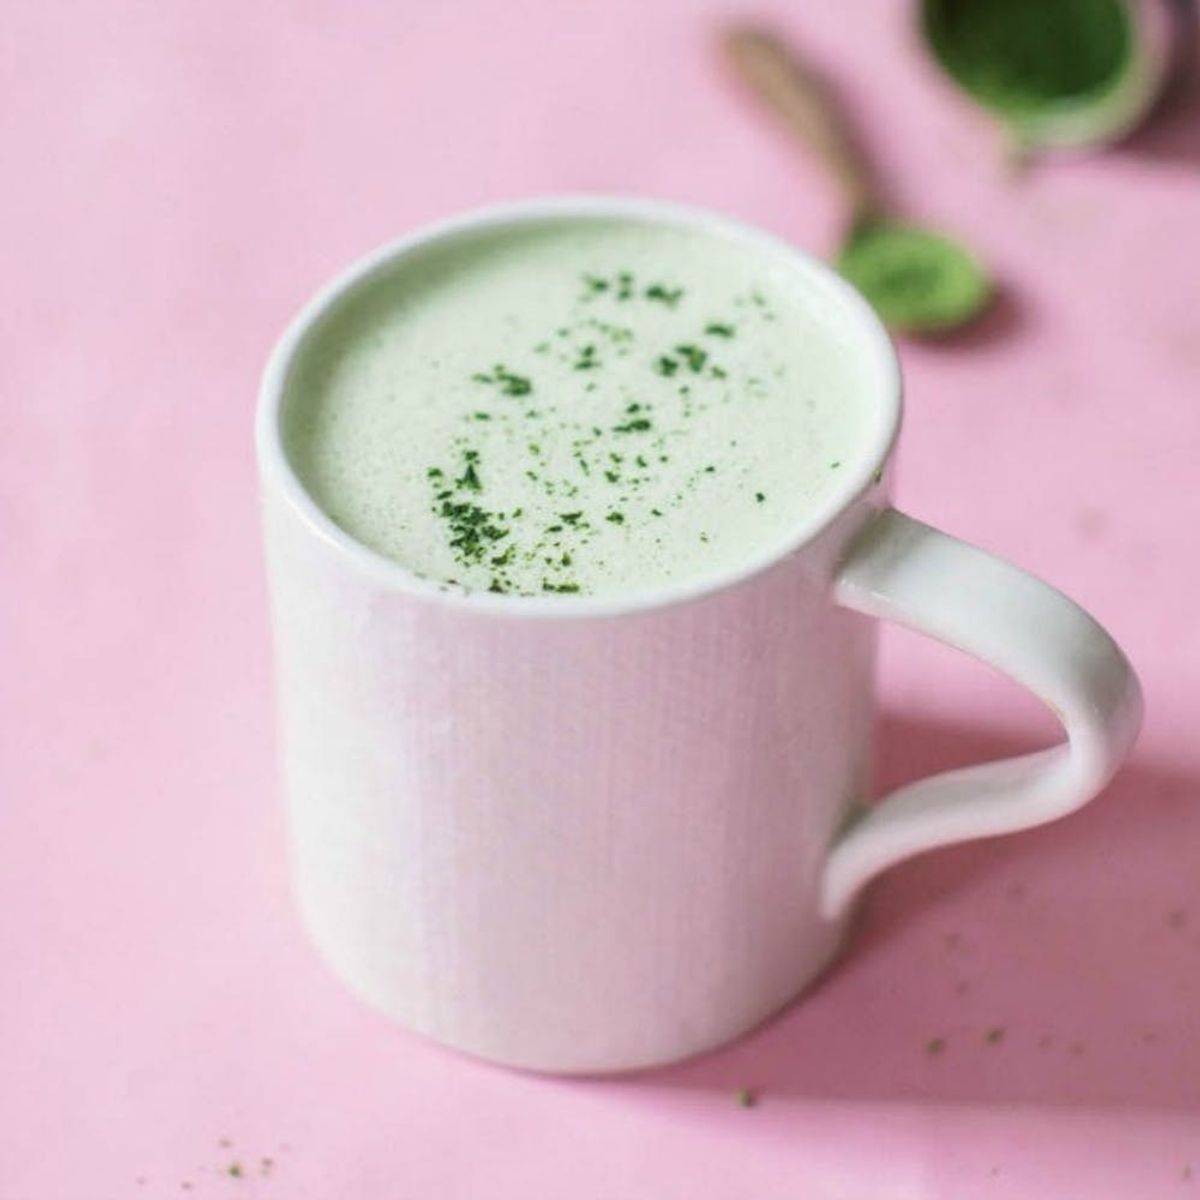 11 Tea Lattes for Fancy Brunches or Chilly Fall Mornings